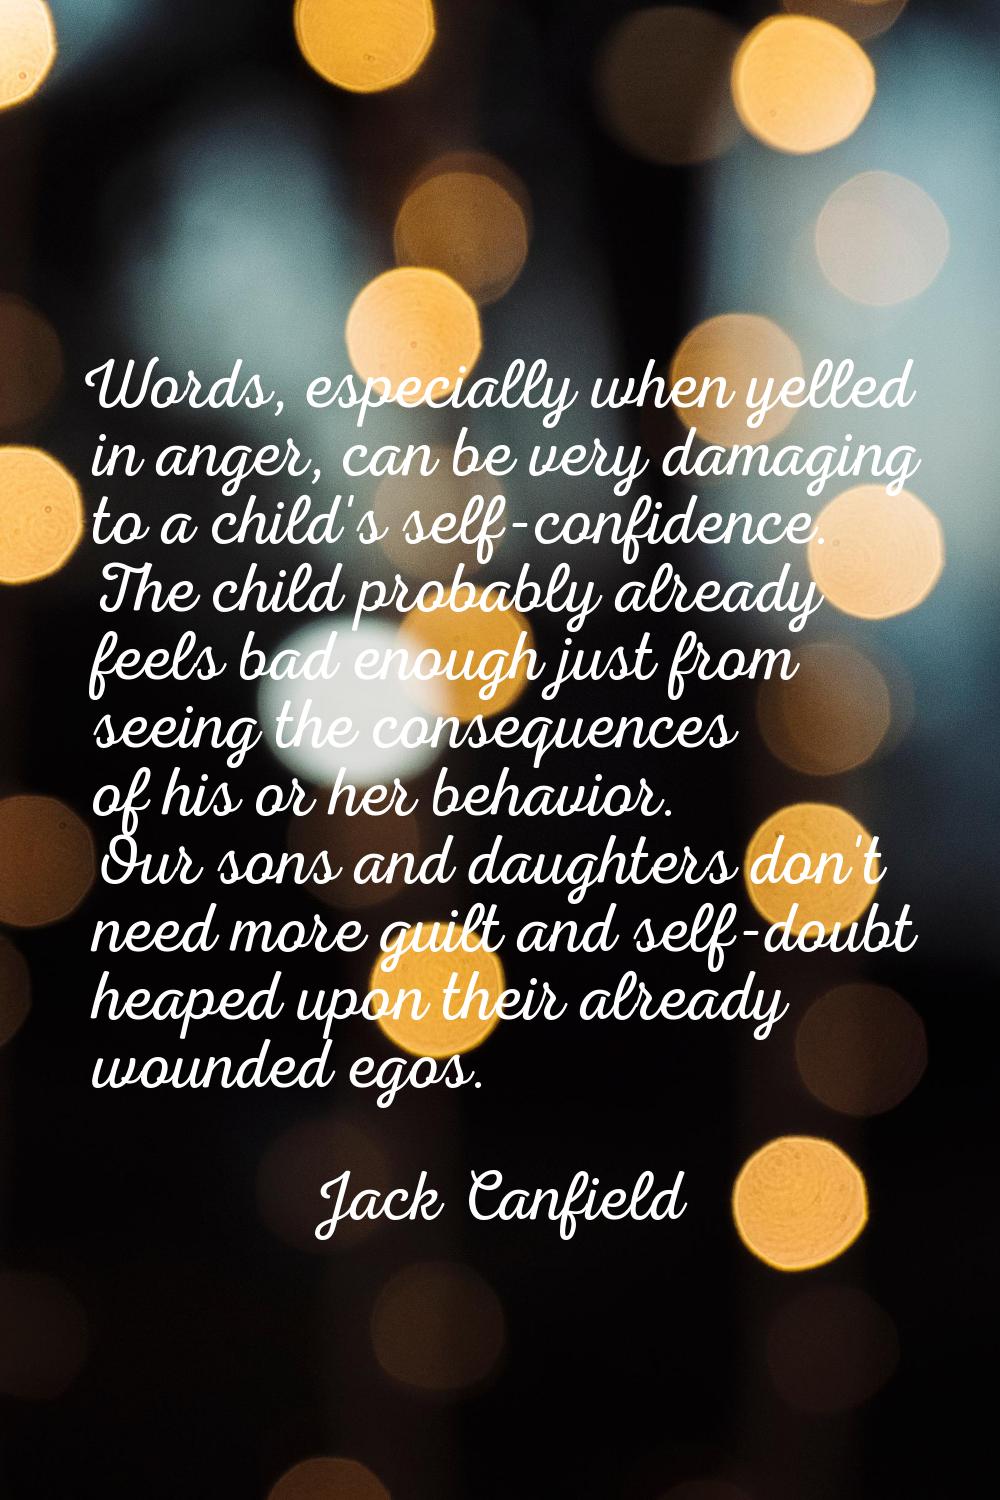 Words, especially when yelled in anger, can be very damaging to a child's self-confidence. The chil